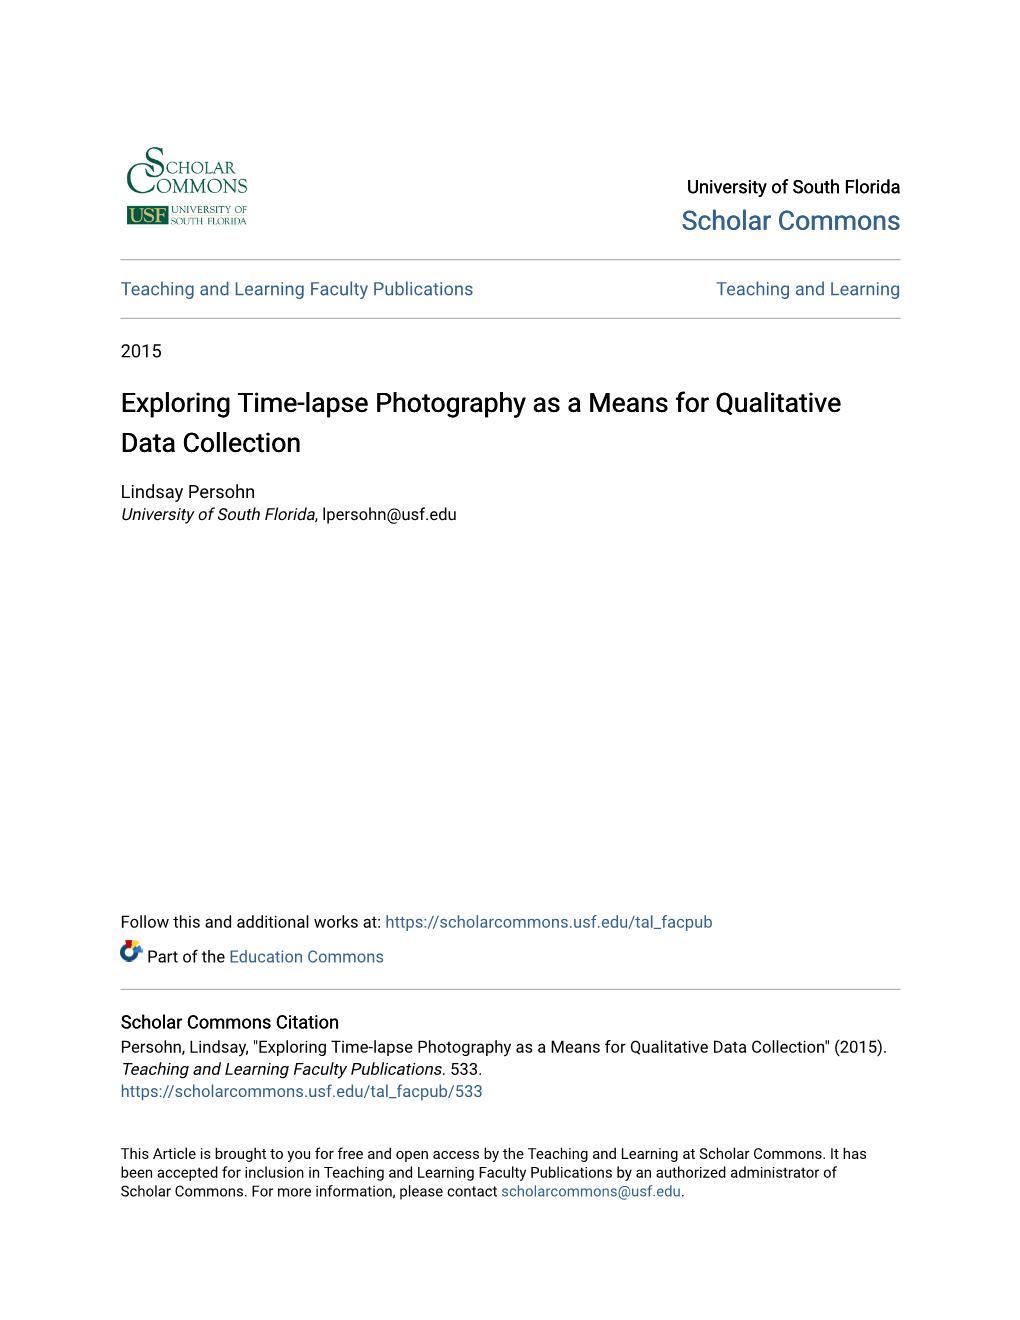 Exploring Time-Lapse Photography As a Means for Qualitative Data Collection